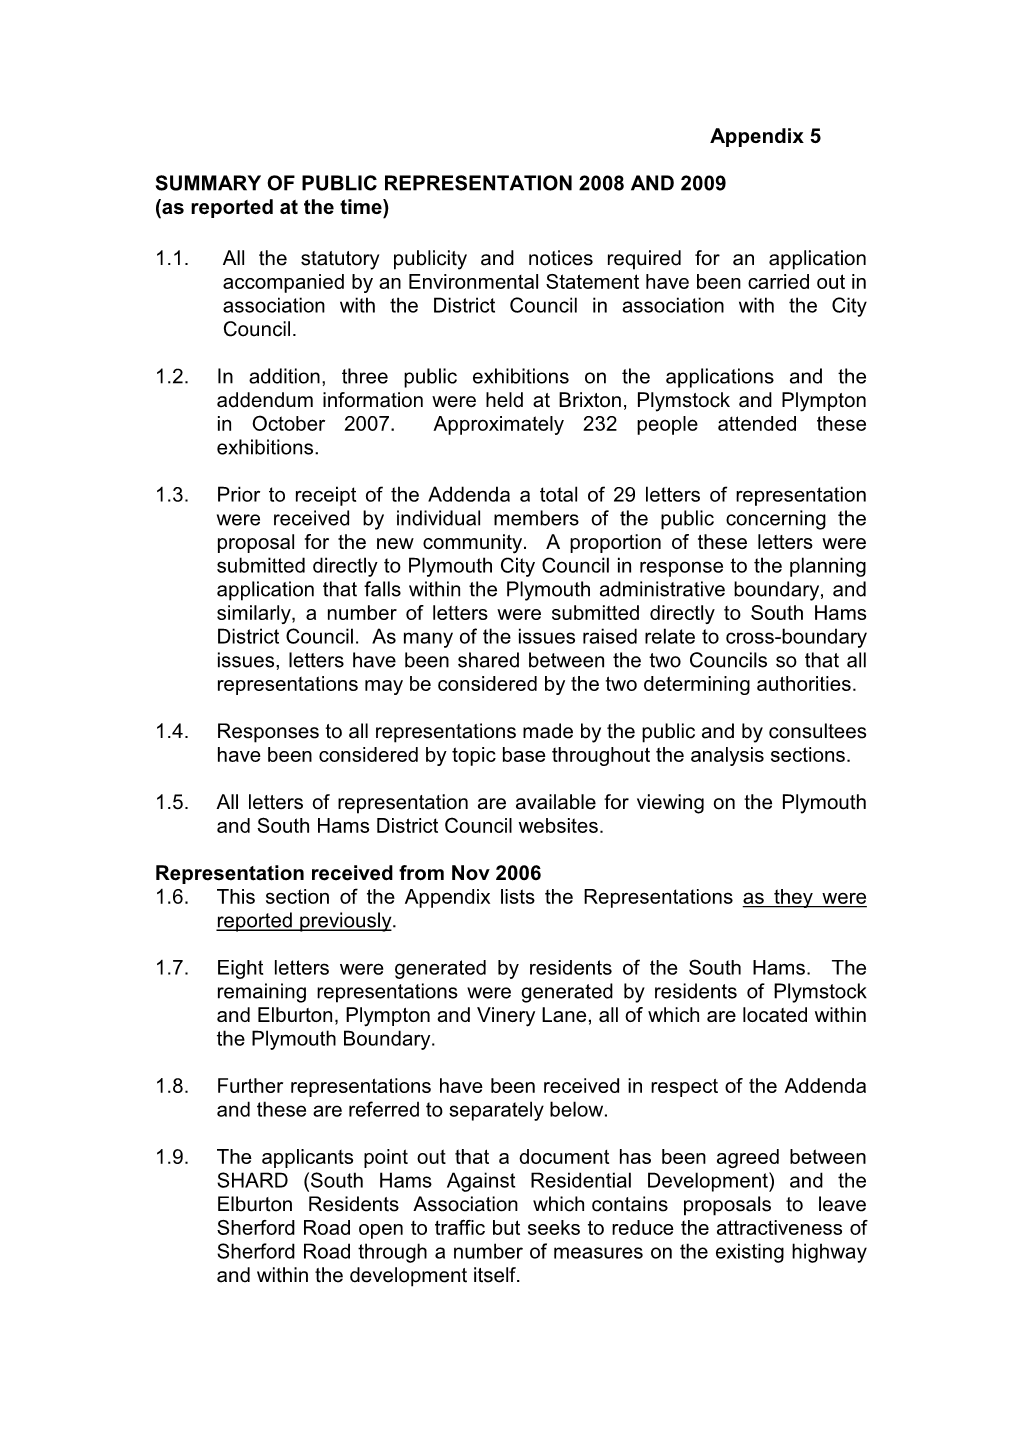 Appendix 5 SUMMARY of PUBLIC REPRESENTATION 2008 and 2009 (As Reported at the Time) 1.1. All the Statutory Publicity and Notices